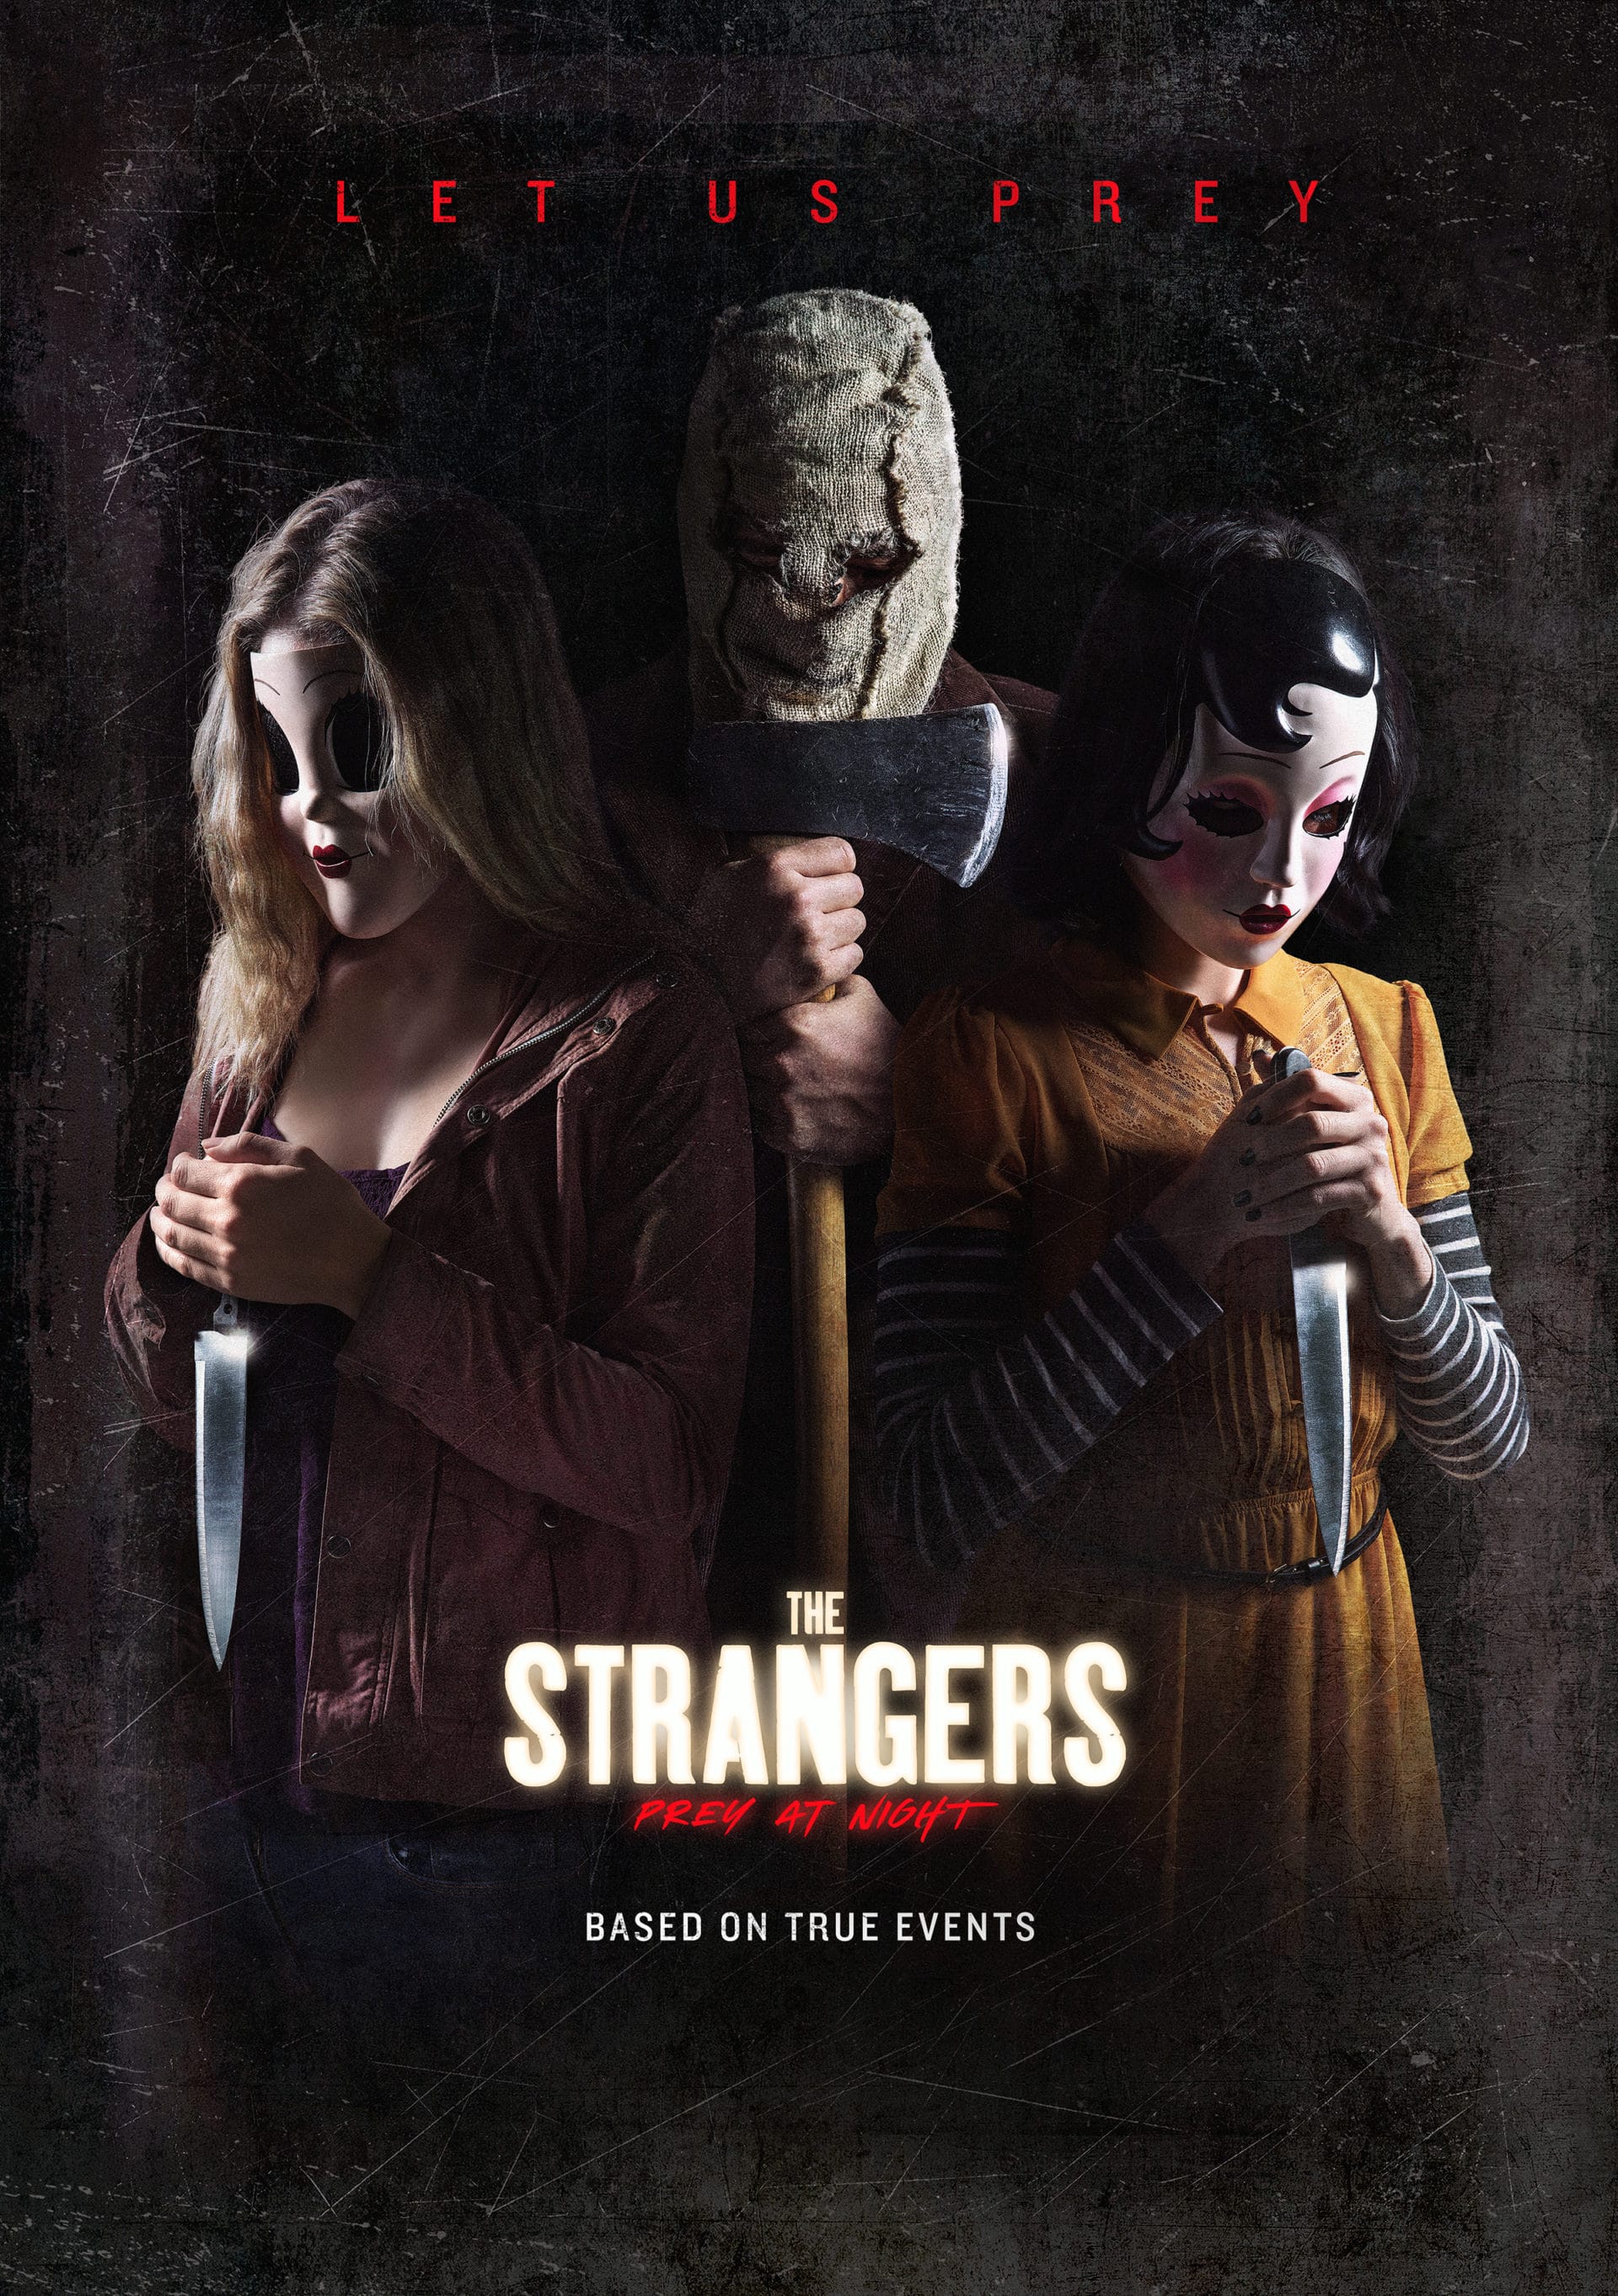 The Strangers Prey at Night CINESKY PICTURES